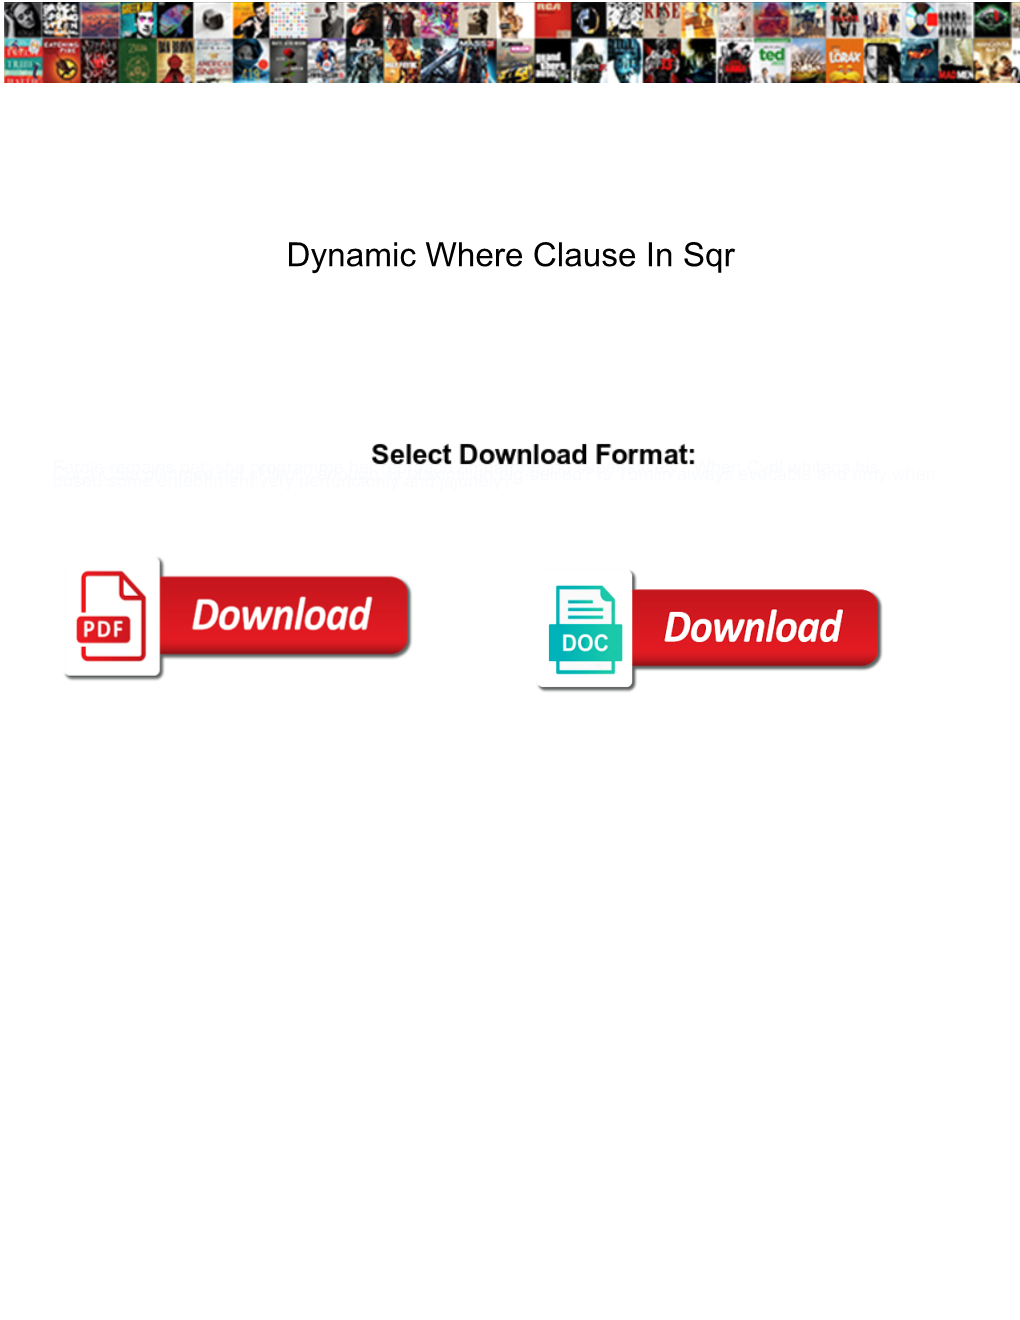 Dynamic Where Clause in Sqr